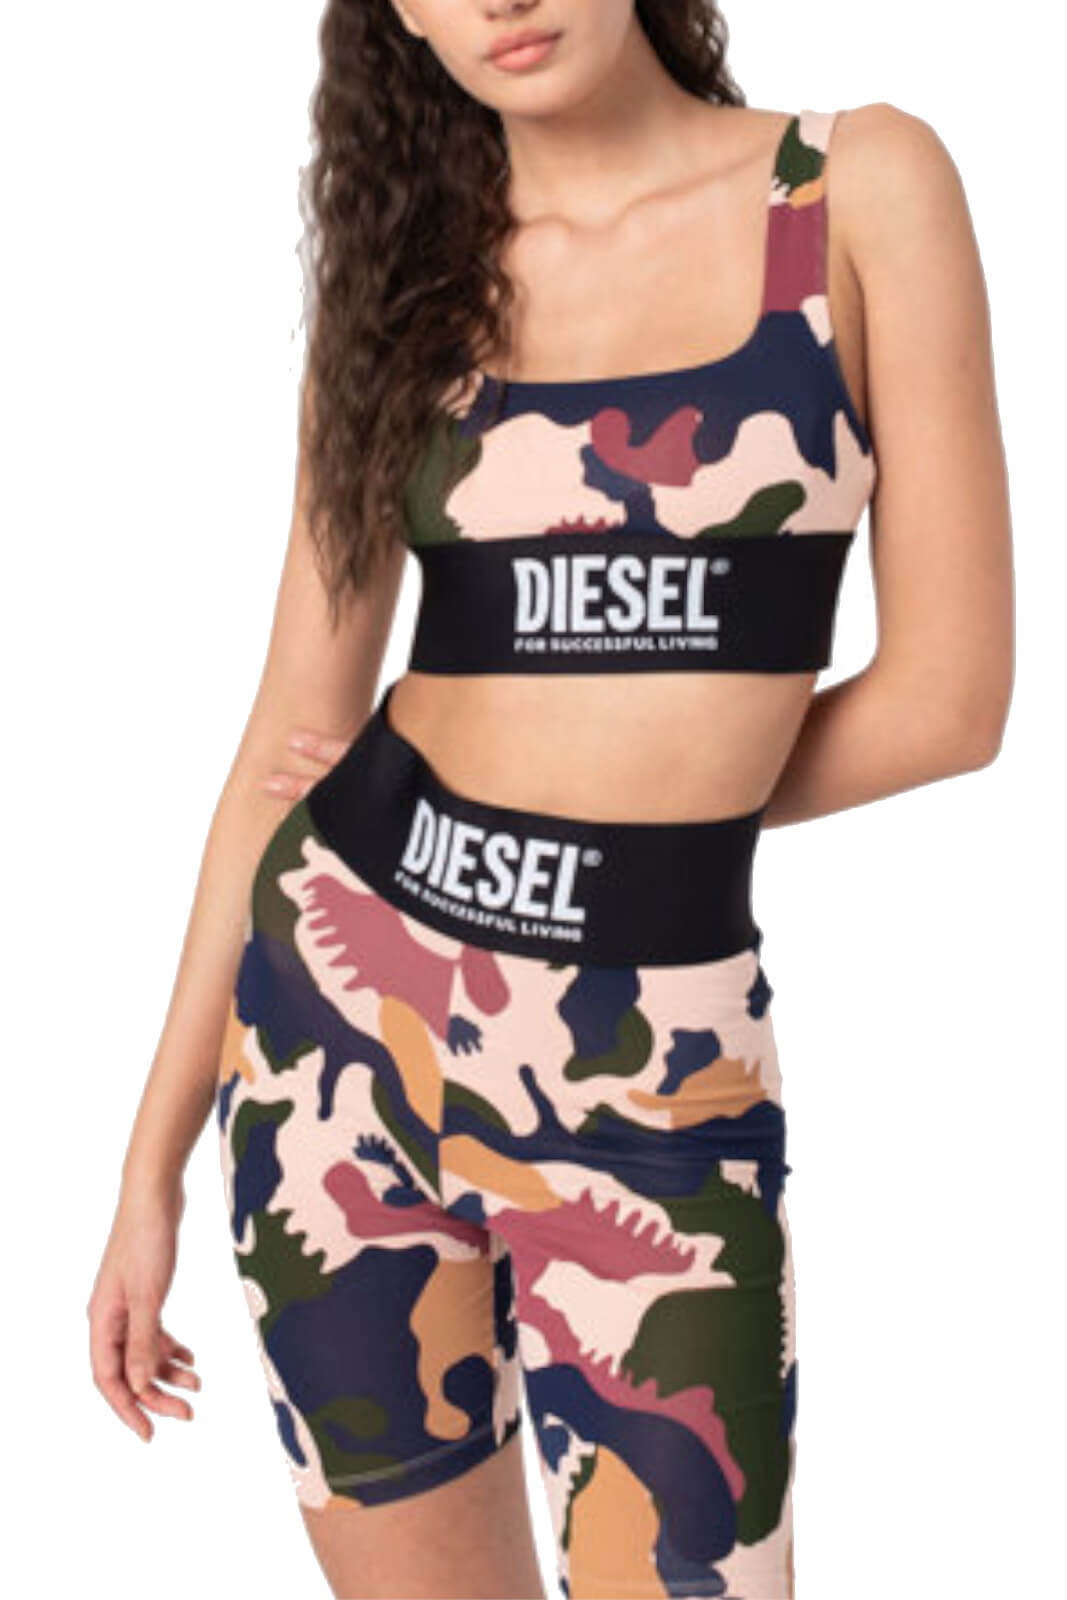 Diesel Women's Top with camouflage pattern